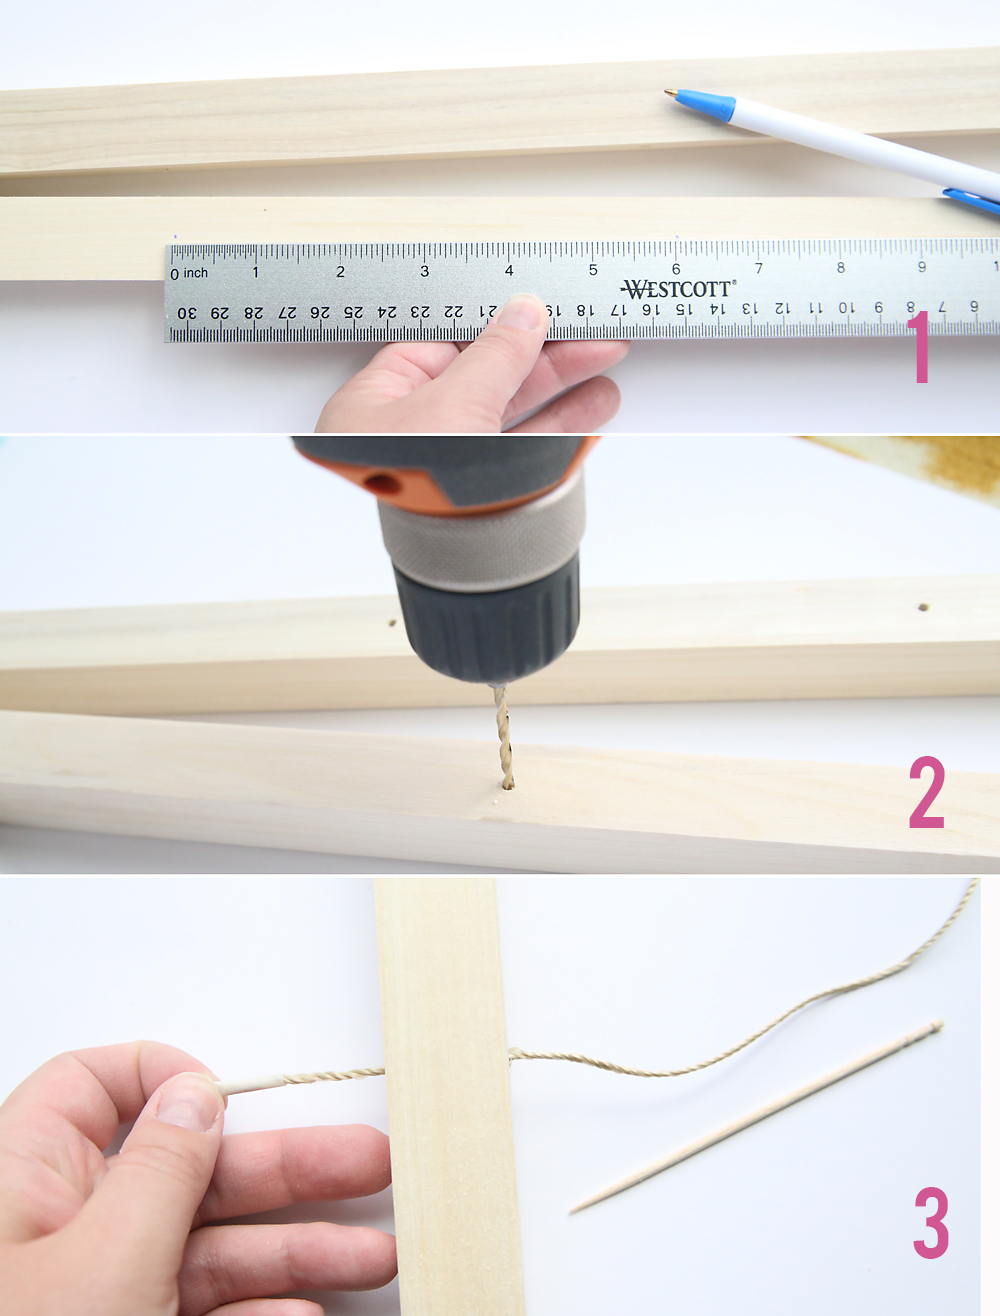 Marking and drilling holes in the dowels, and threading twine through holes